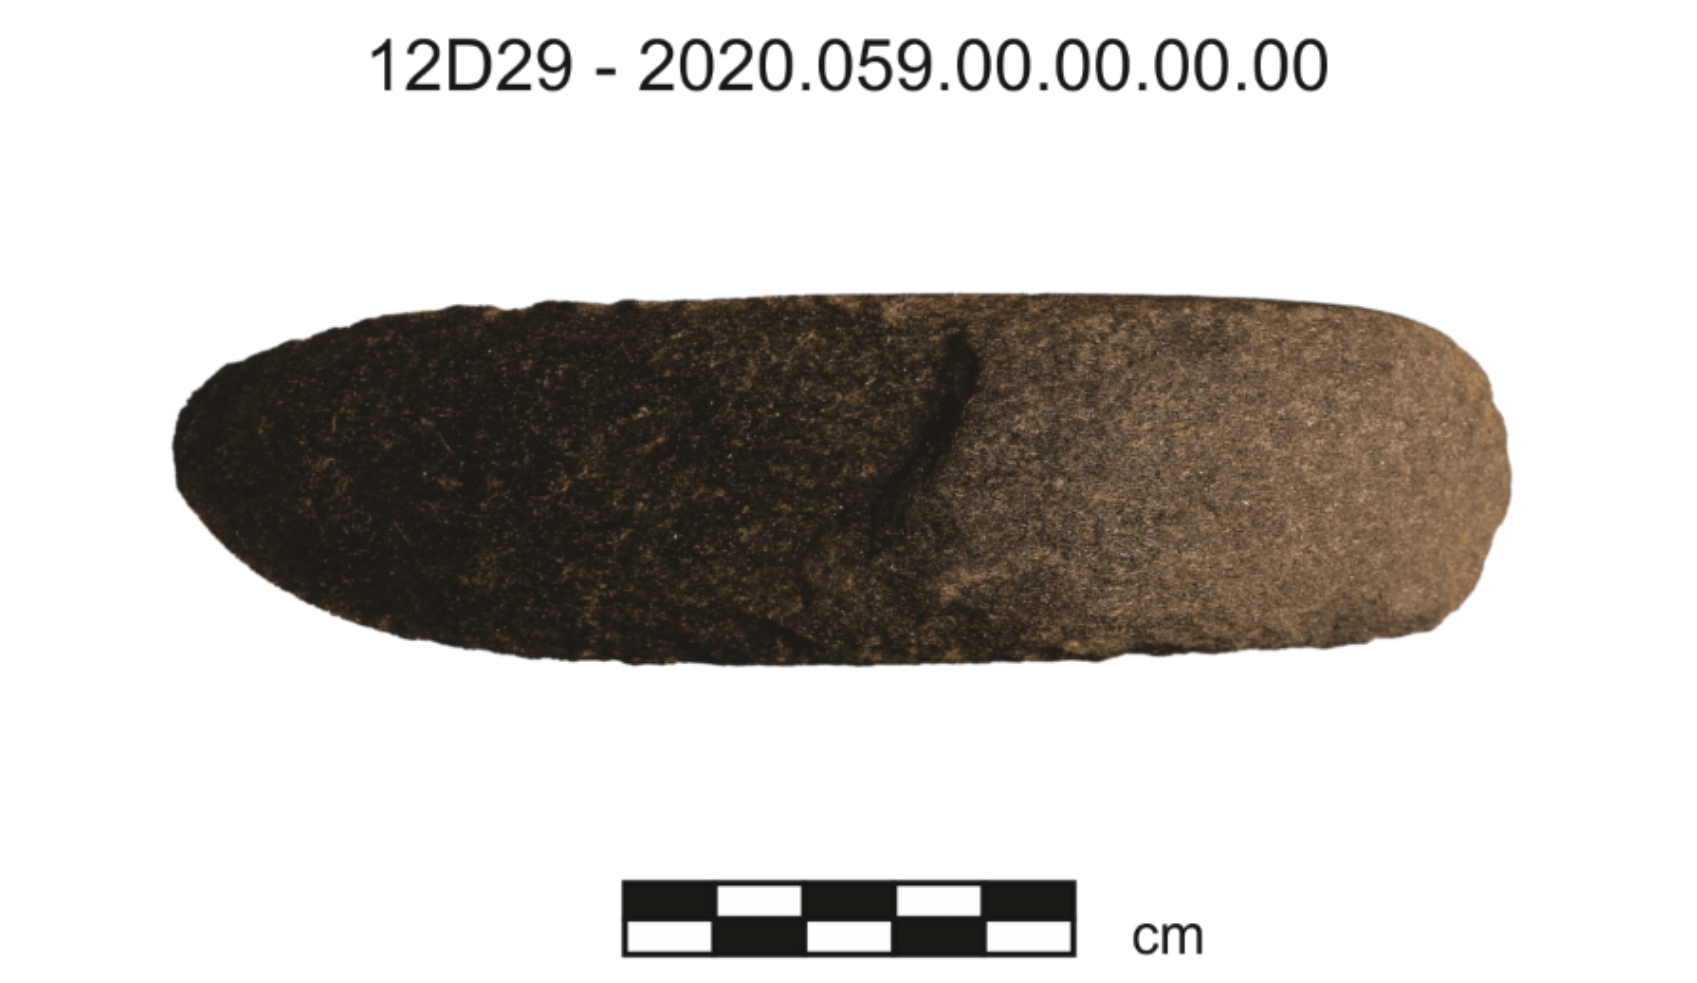 Stone axe made from basalt.